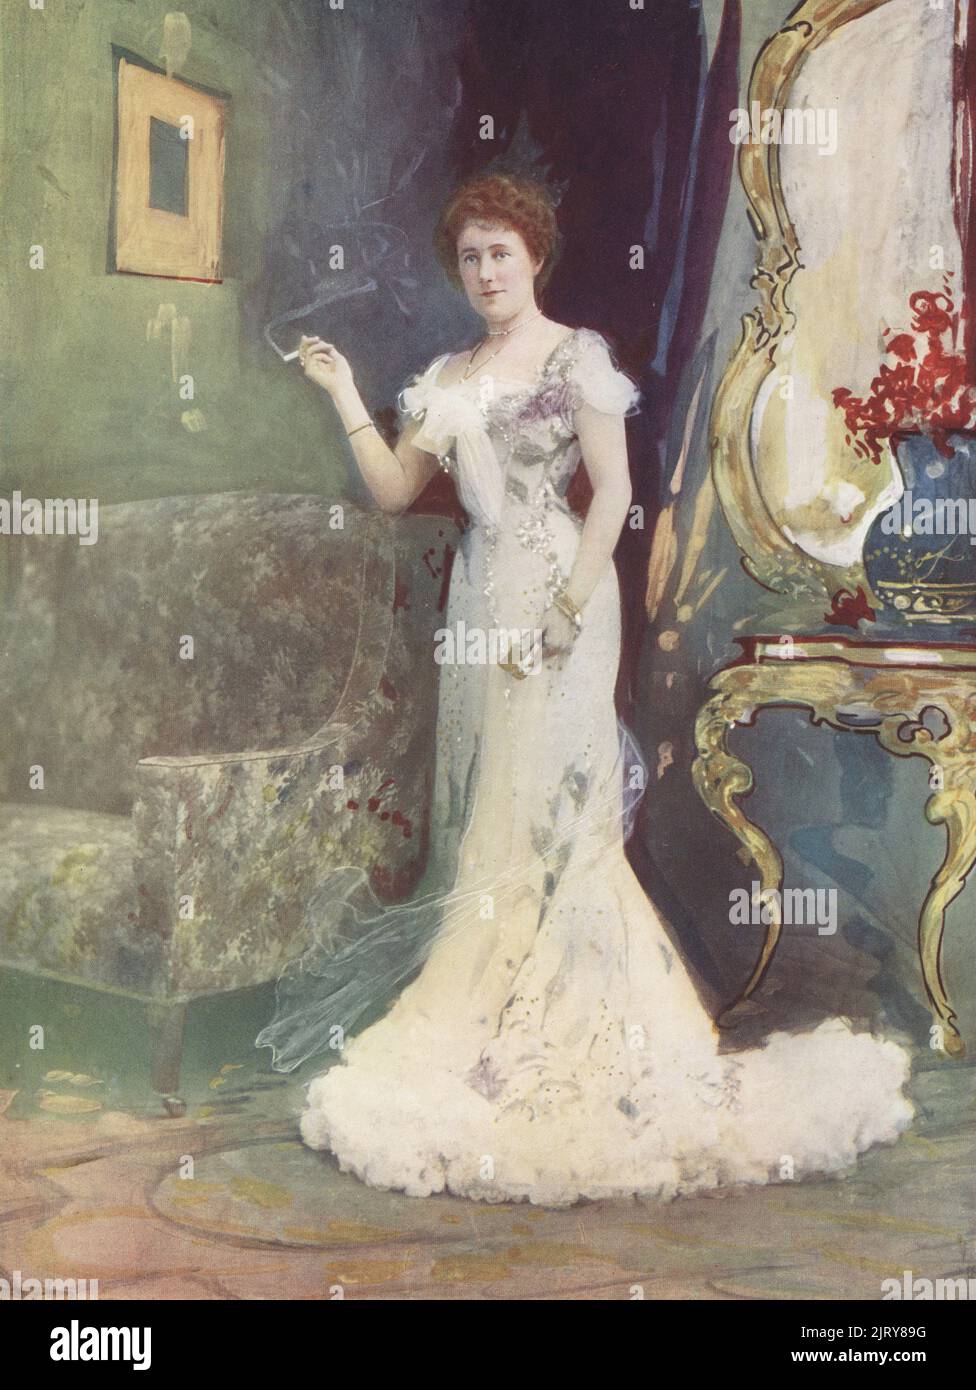 Miss Granville as Mrs Daniel Gordon smoking a cigarette in An Interrupted Honeymoon, a comedy by F. Kinsey Peile, 1899. Charlotte Granville, British stage and film actress, 1860-1942. Photograph by Alfred Ellis and Walery (Stanislaw Julian Ignacy). Colour printing of a hand-coloured illustration based on a monochrome photograph from George Newnes’s Players of the Day, London, 1905. Stock Photo